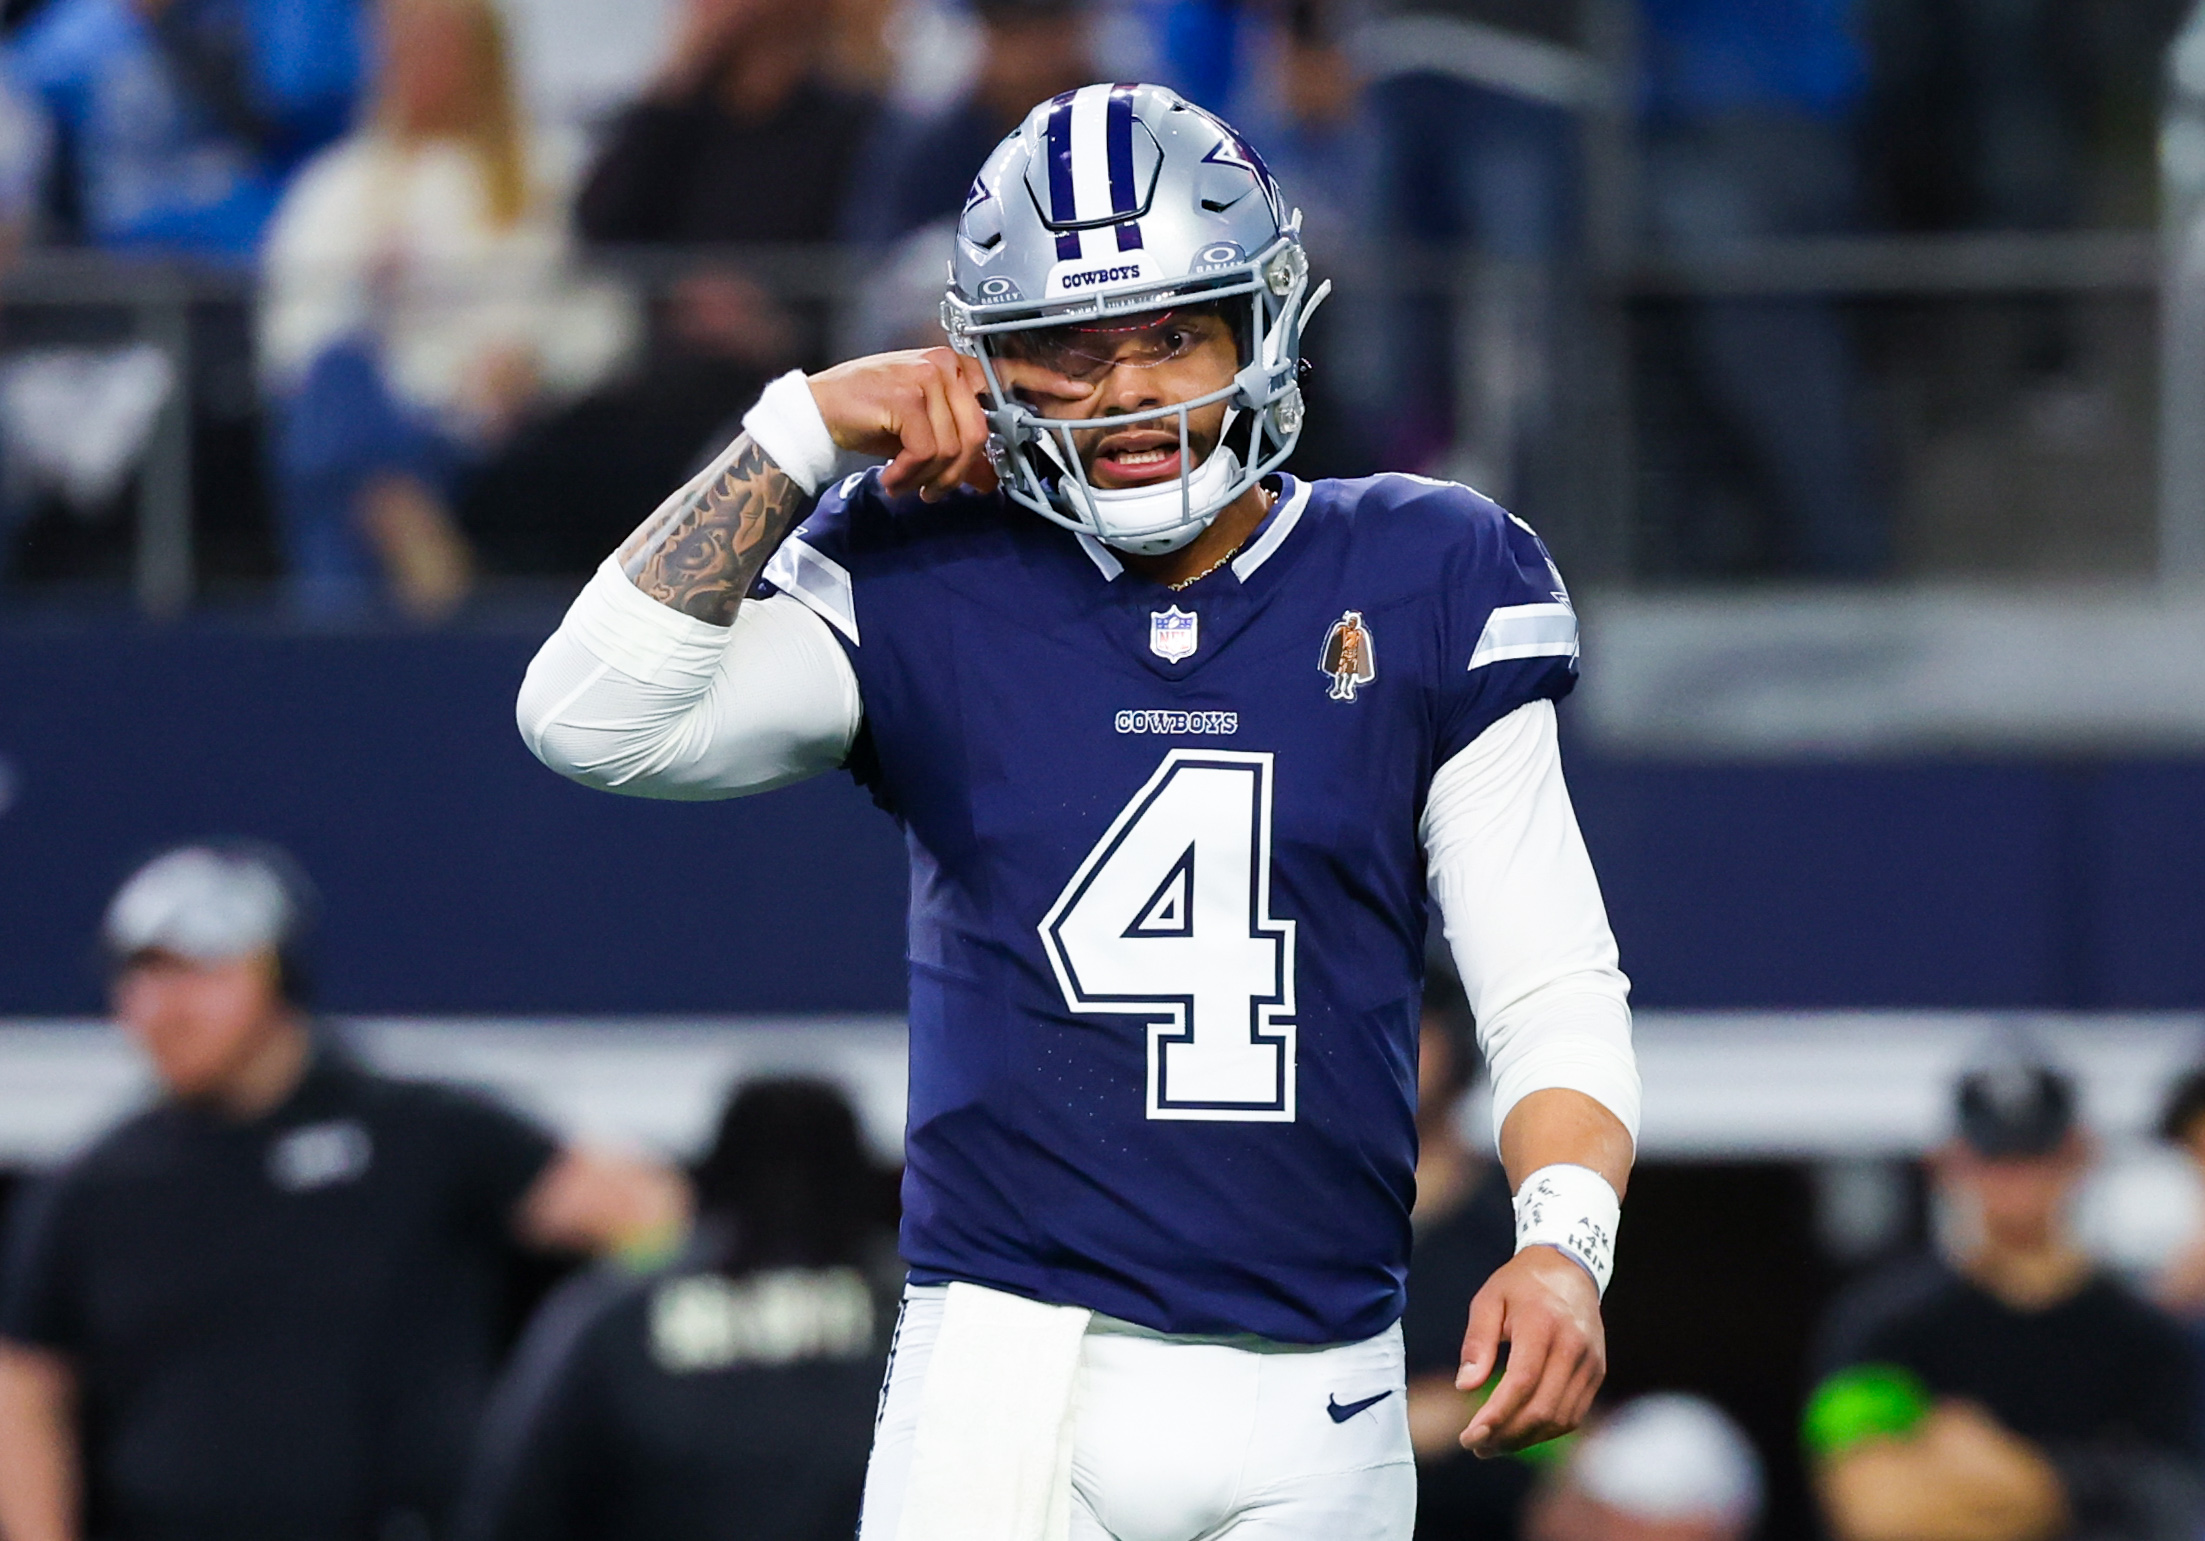  Shaking Up the Gridiron Giants' Potential Power Moves with Dak Prescott and Bill Belichick.